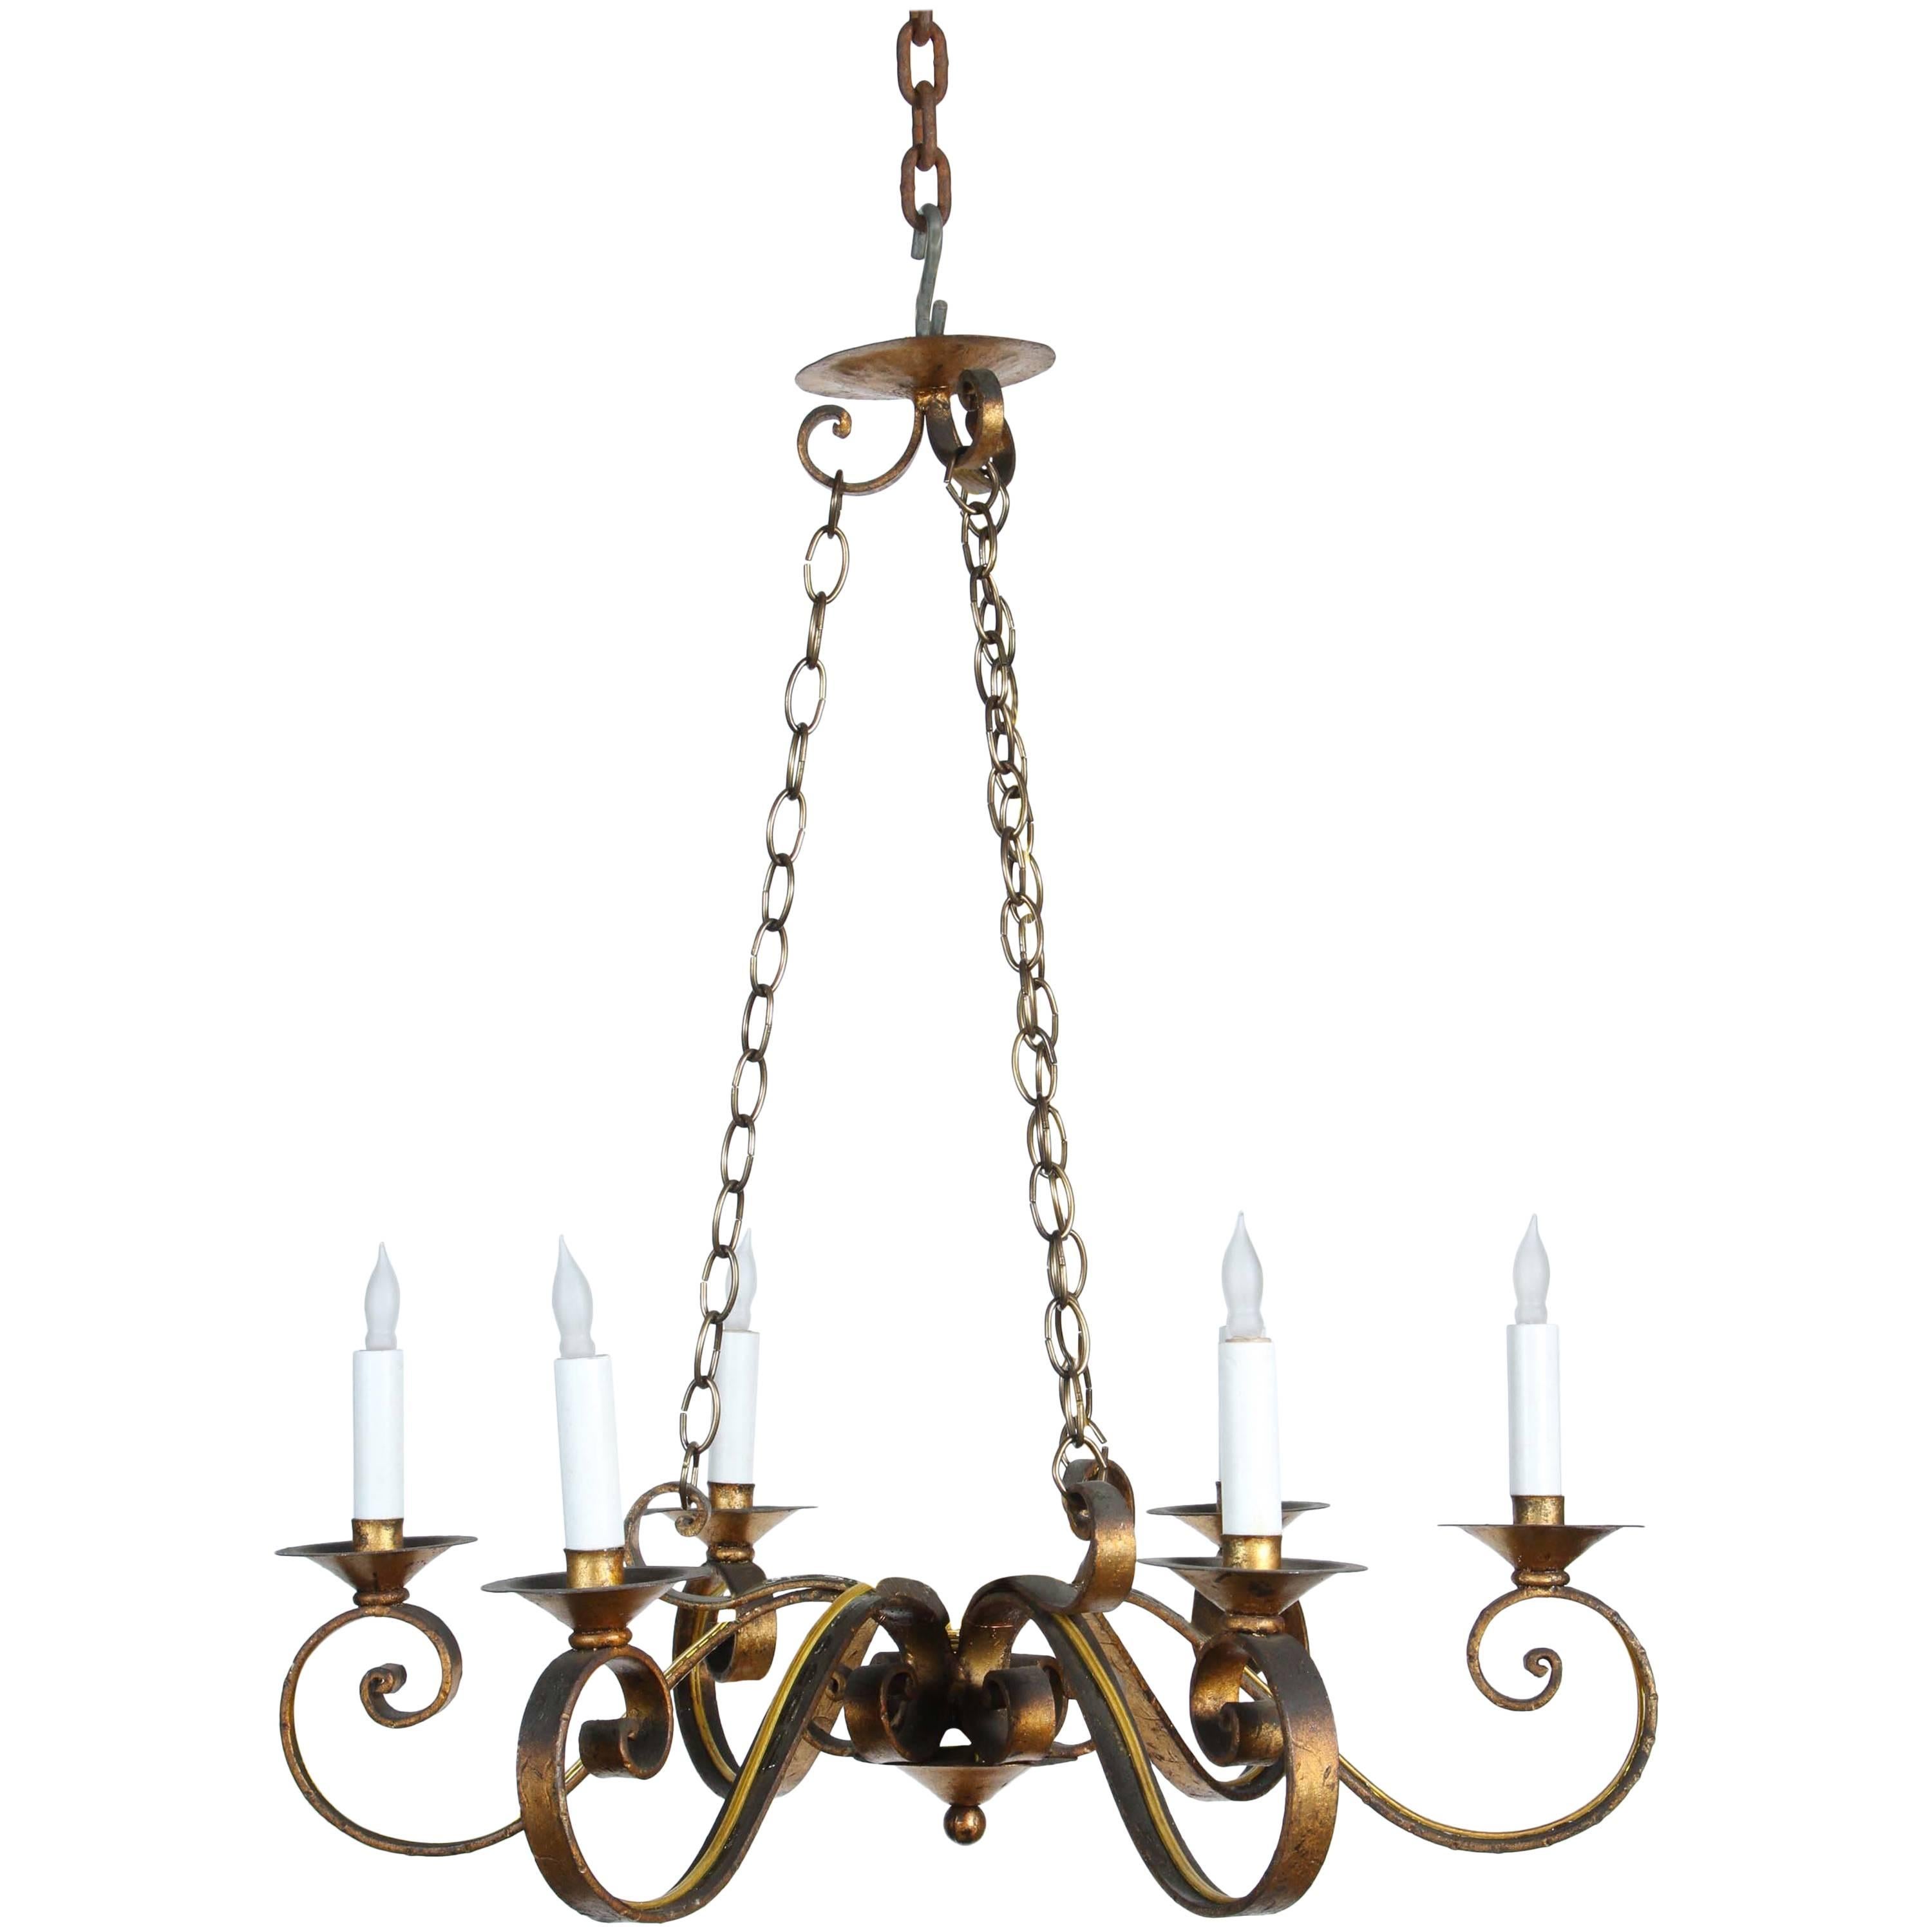 1970s Six-Arm Golden Wrought Iron Chandelier with Canopy and Chain